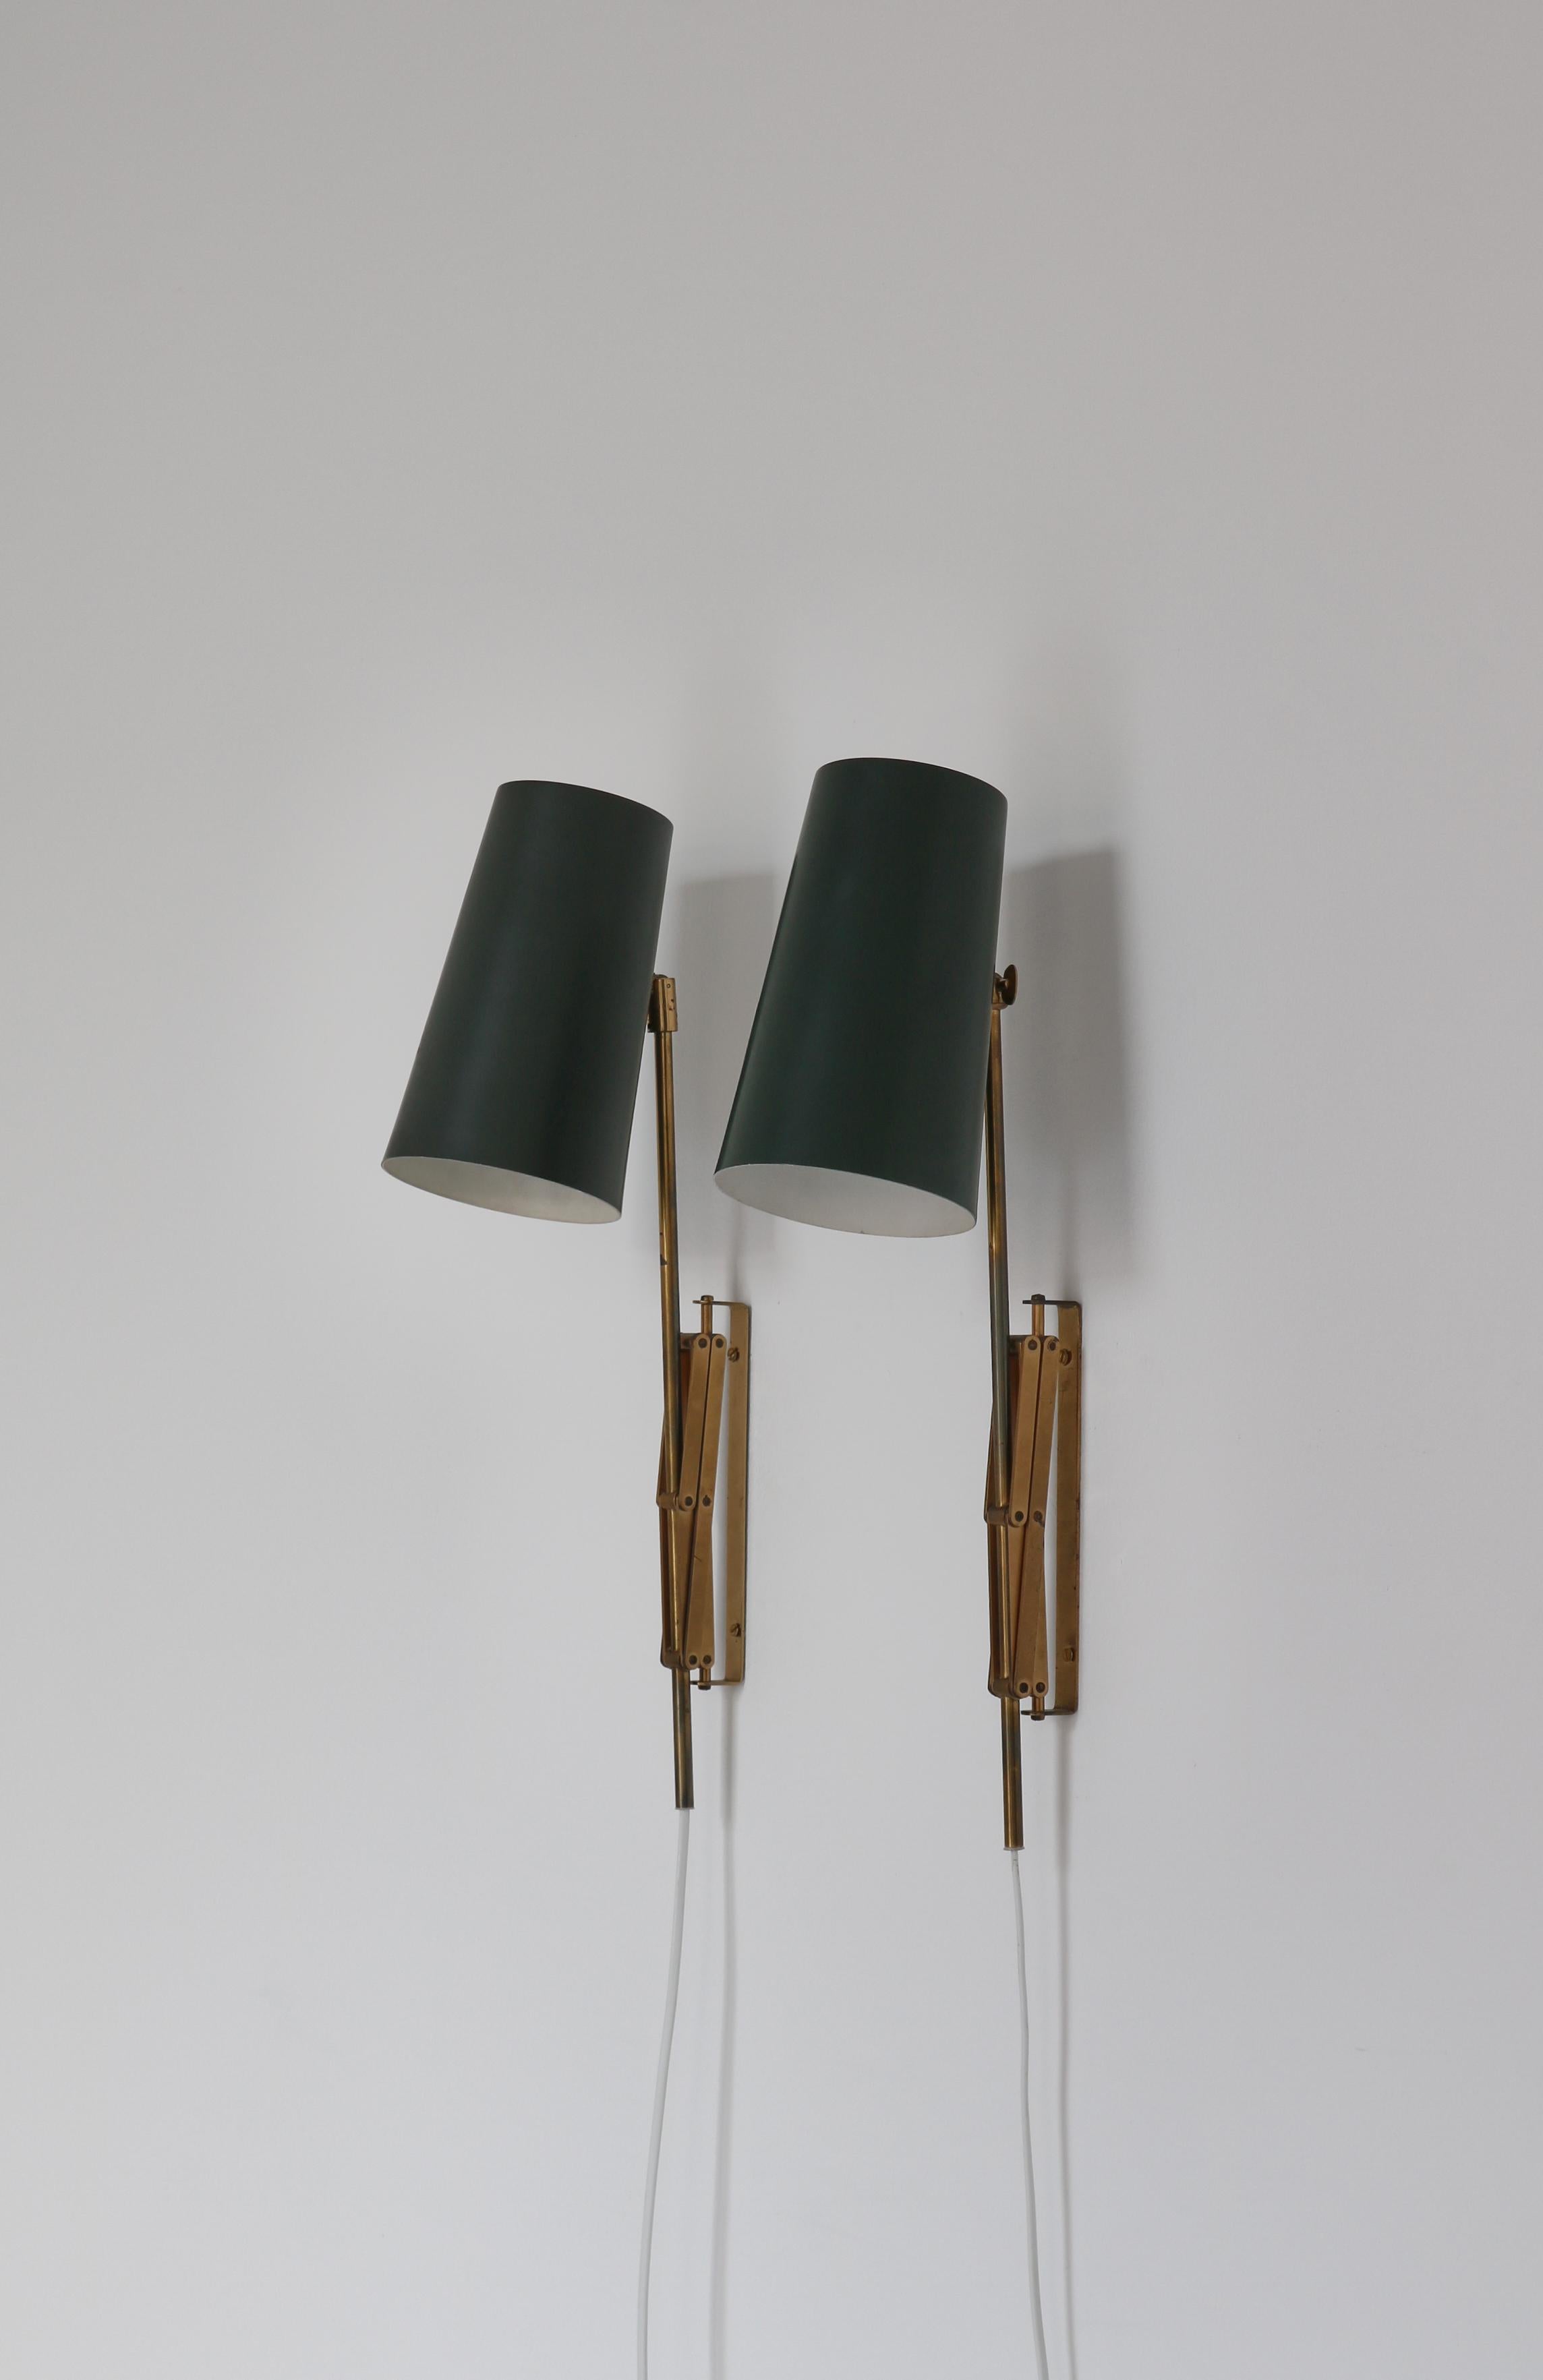 Scandinavian Modern Brass Wall Lamps w. Green Shades by T.H. Valentiner, 1960s For Sale 13